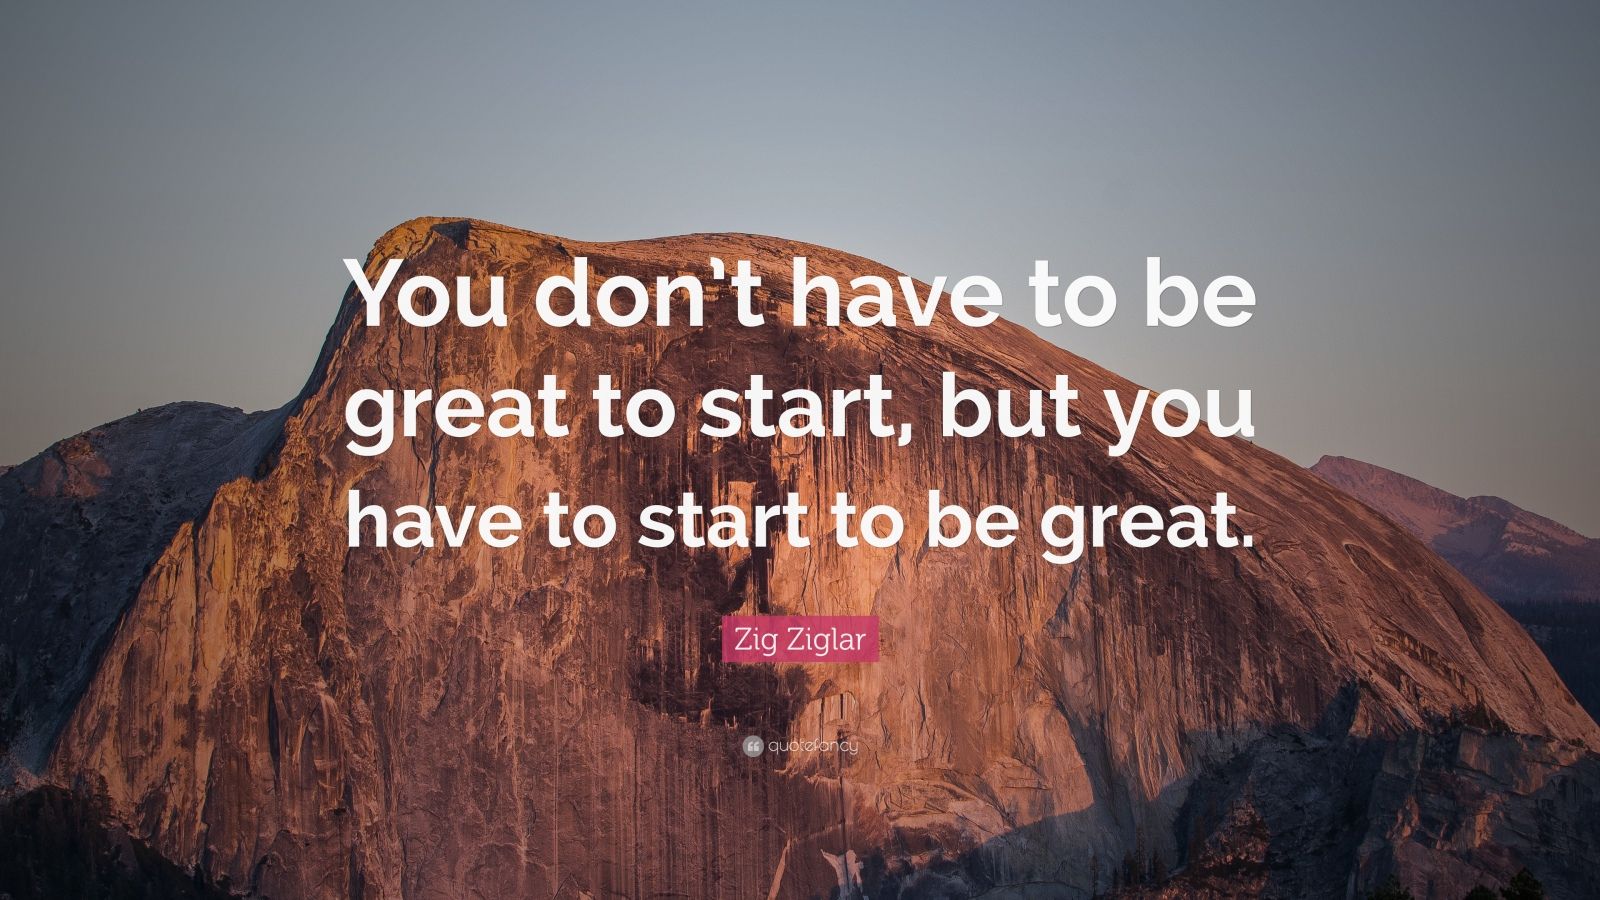 Zig Ziglar Quote: “You don’t have to be great to start, but you have to